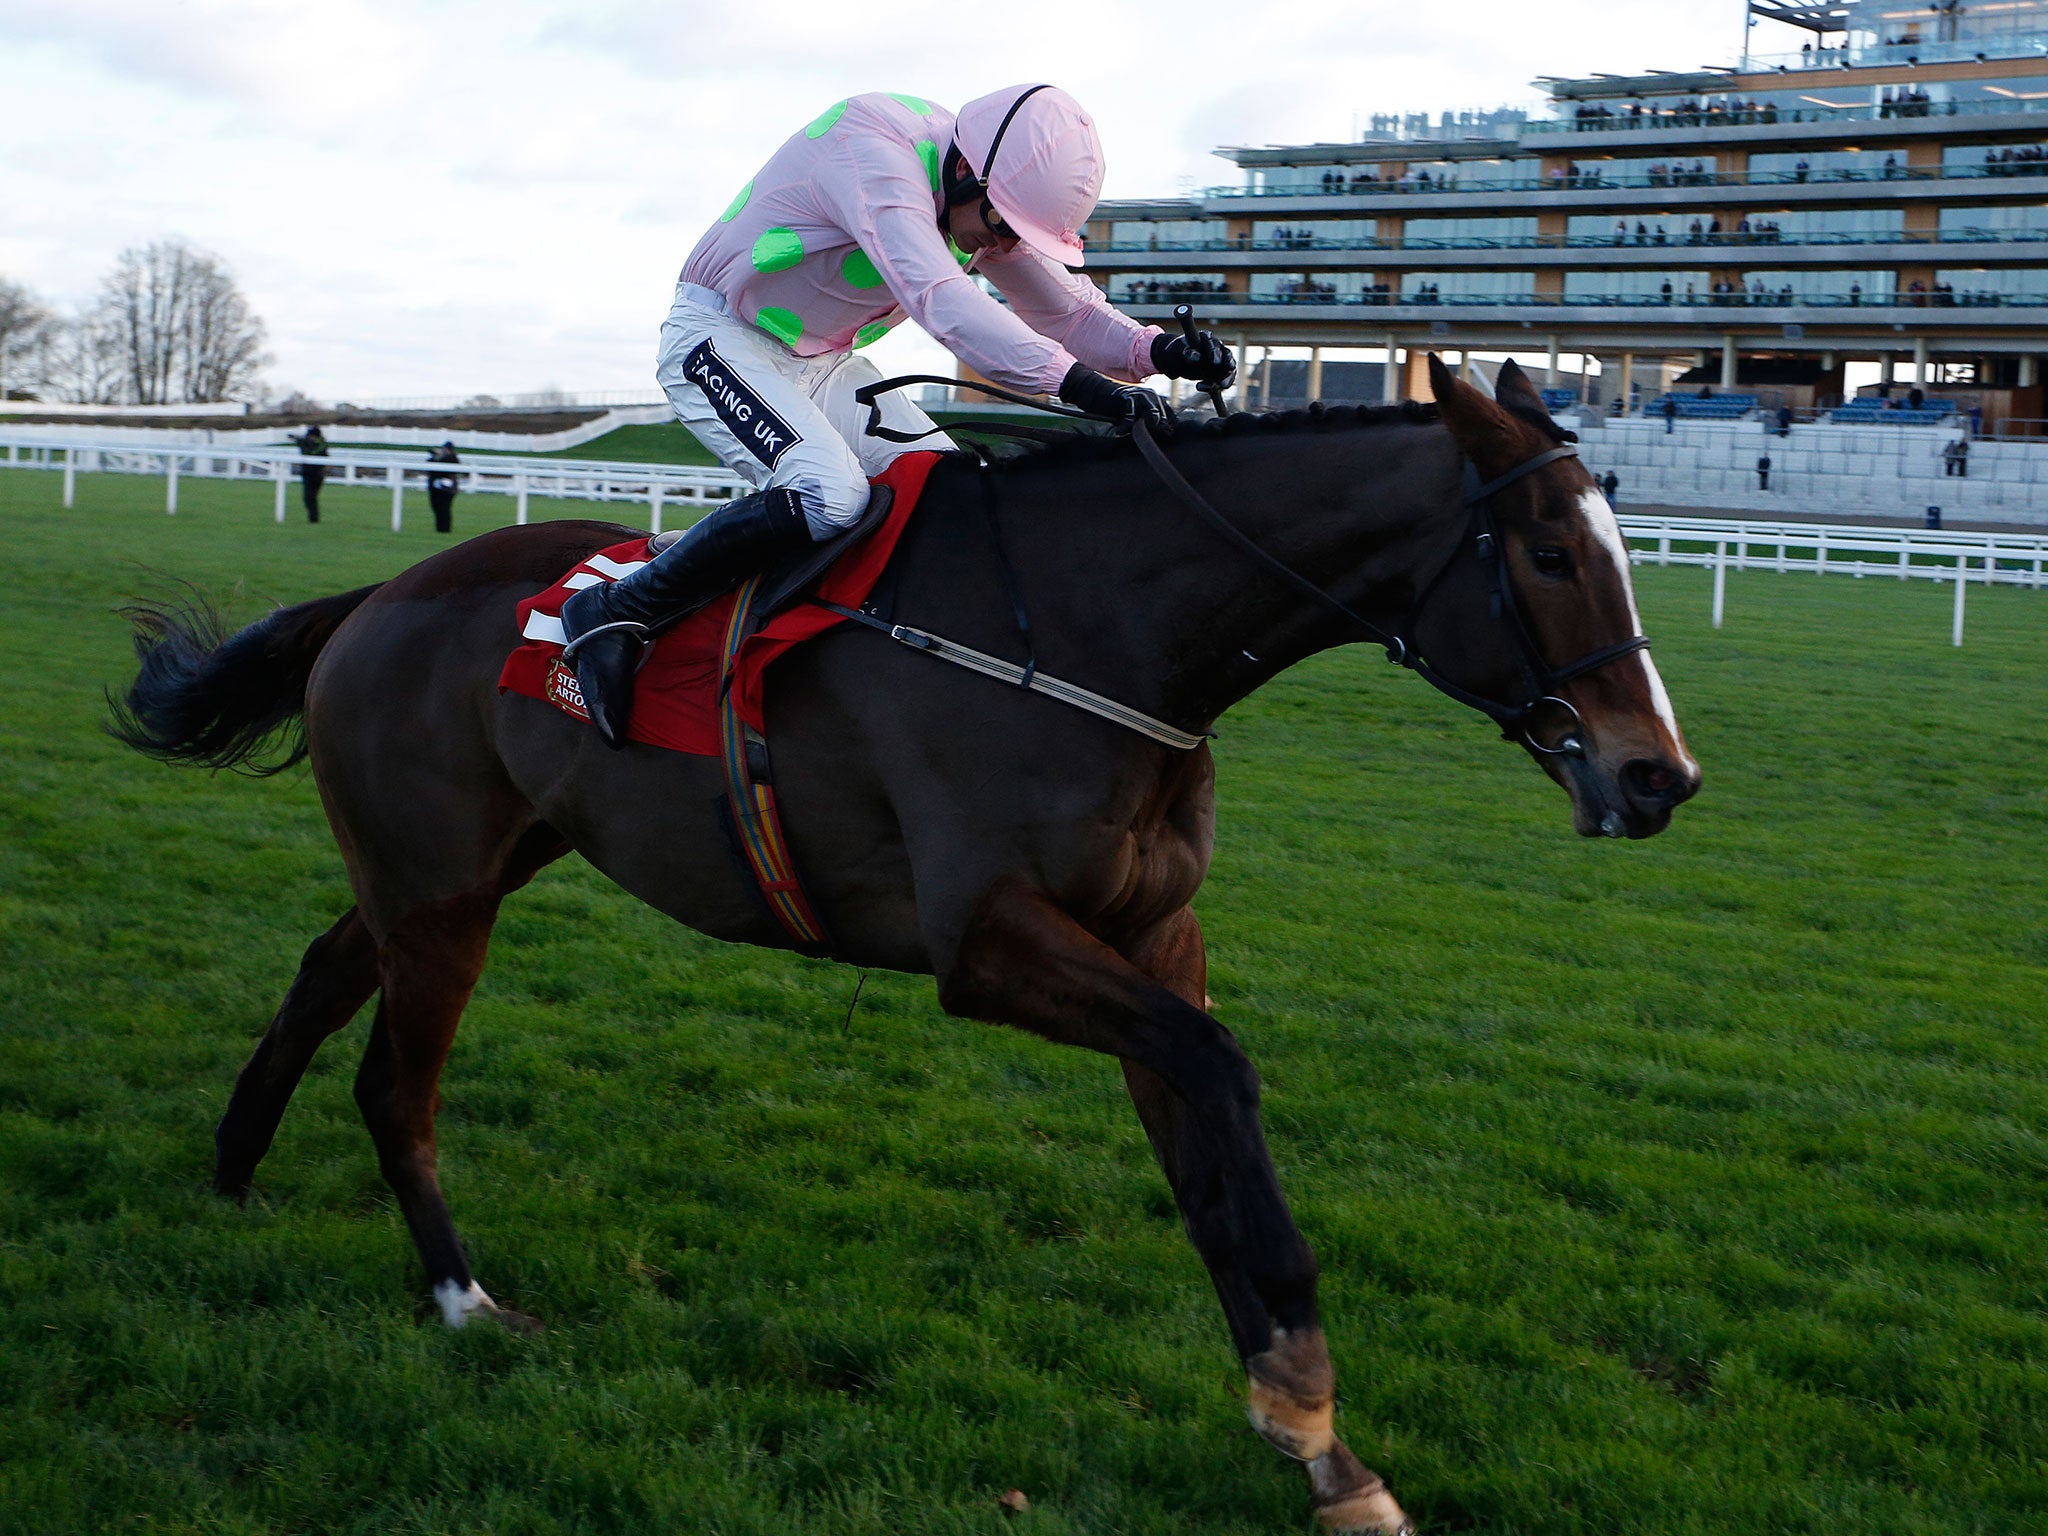 Vautour will run in the Ryanair Chase instead of the Gold Cup at the Cheltenham Festival